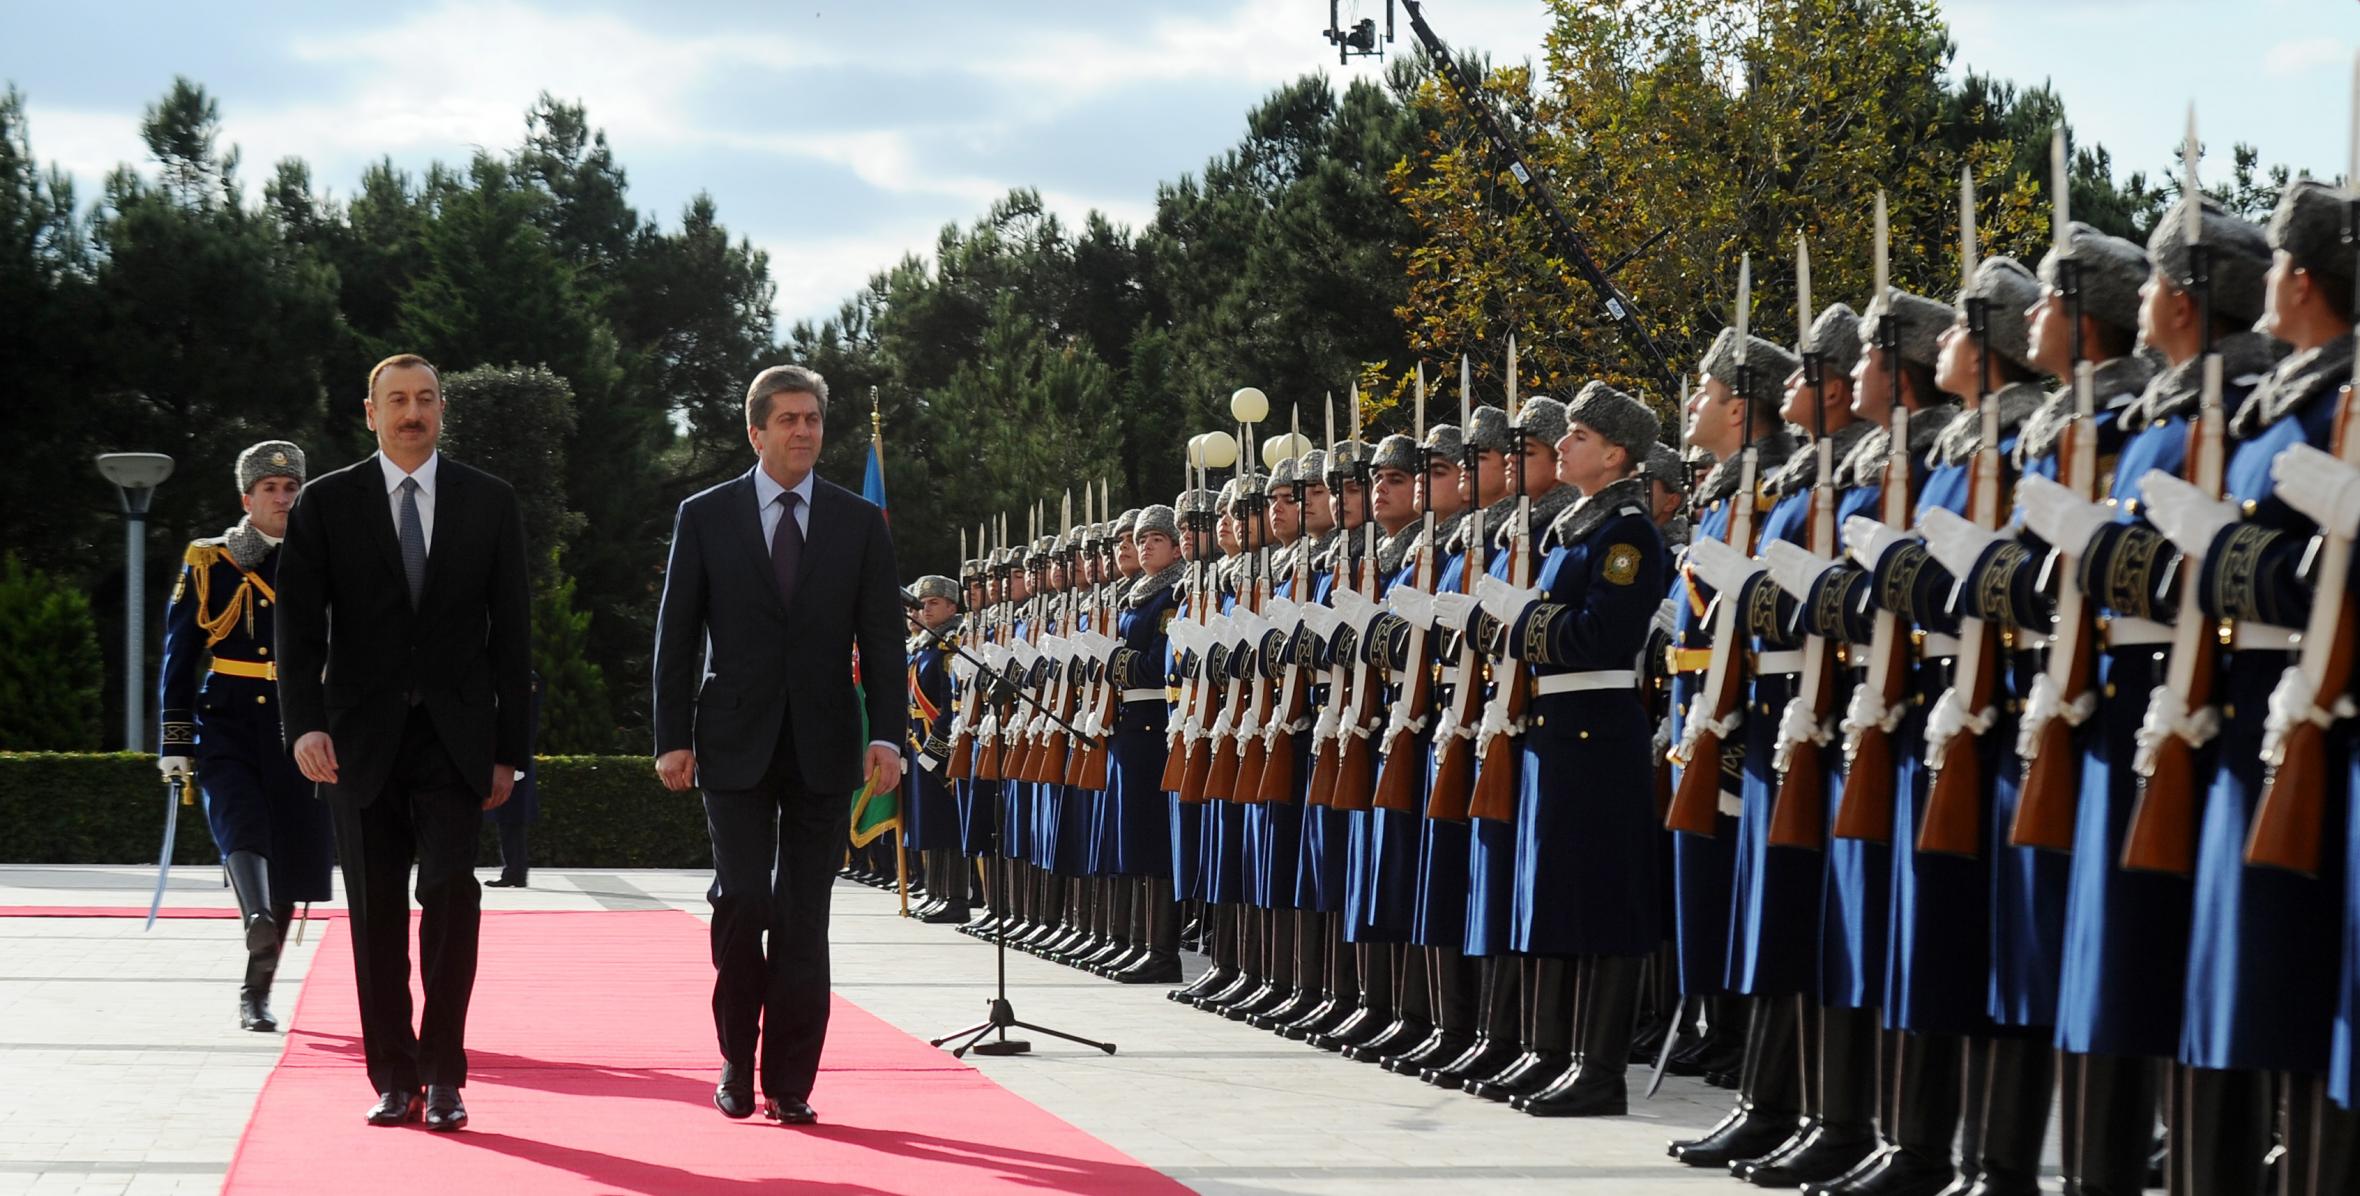 Official welcoming ceremony of President of the Republic of Bulgaria Georgi Parvanov was held